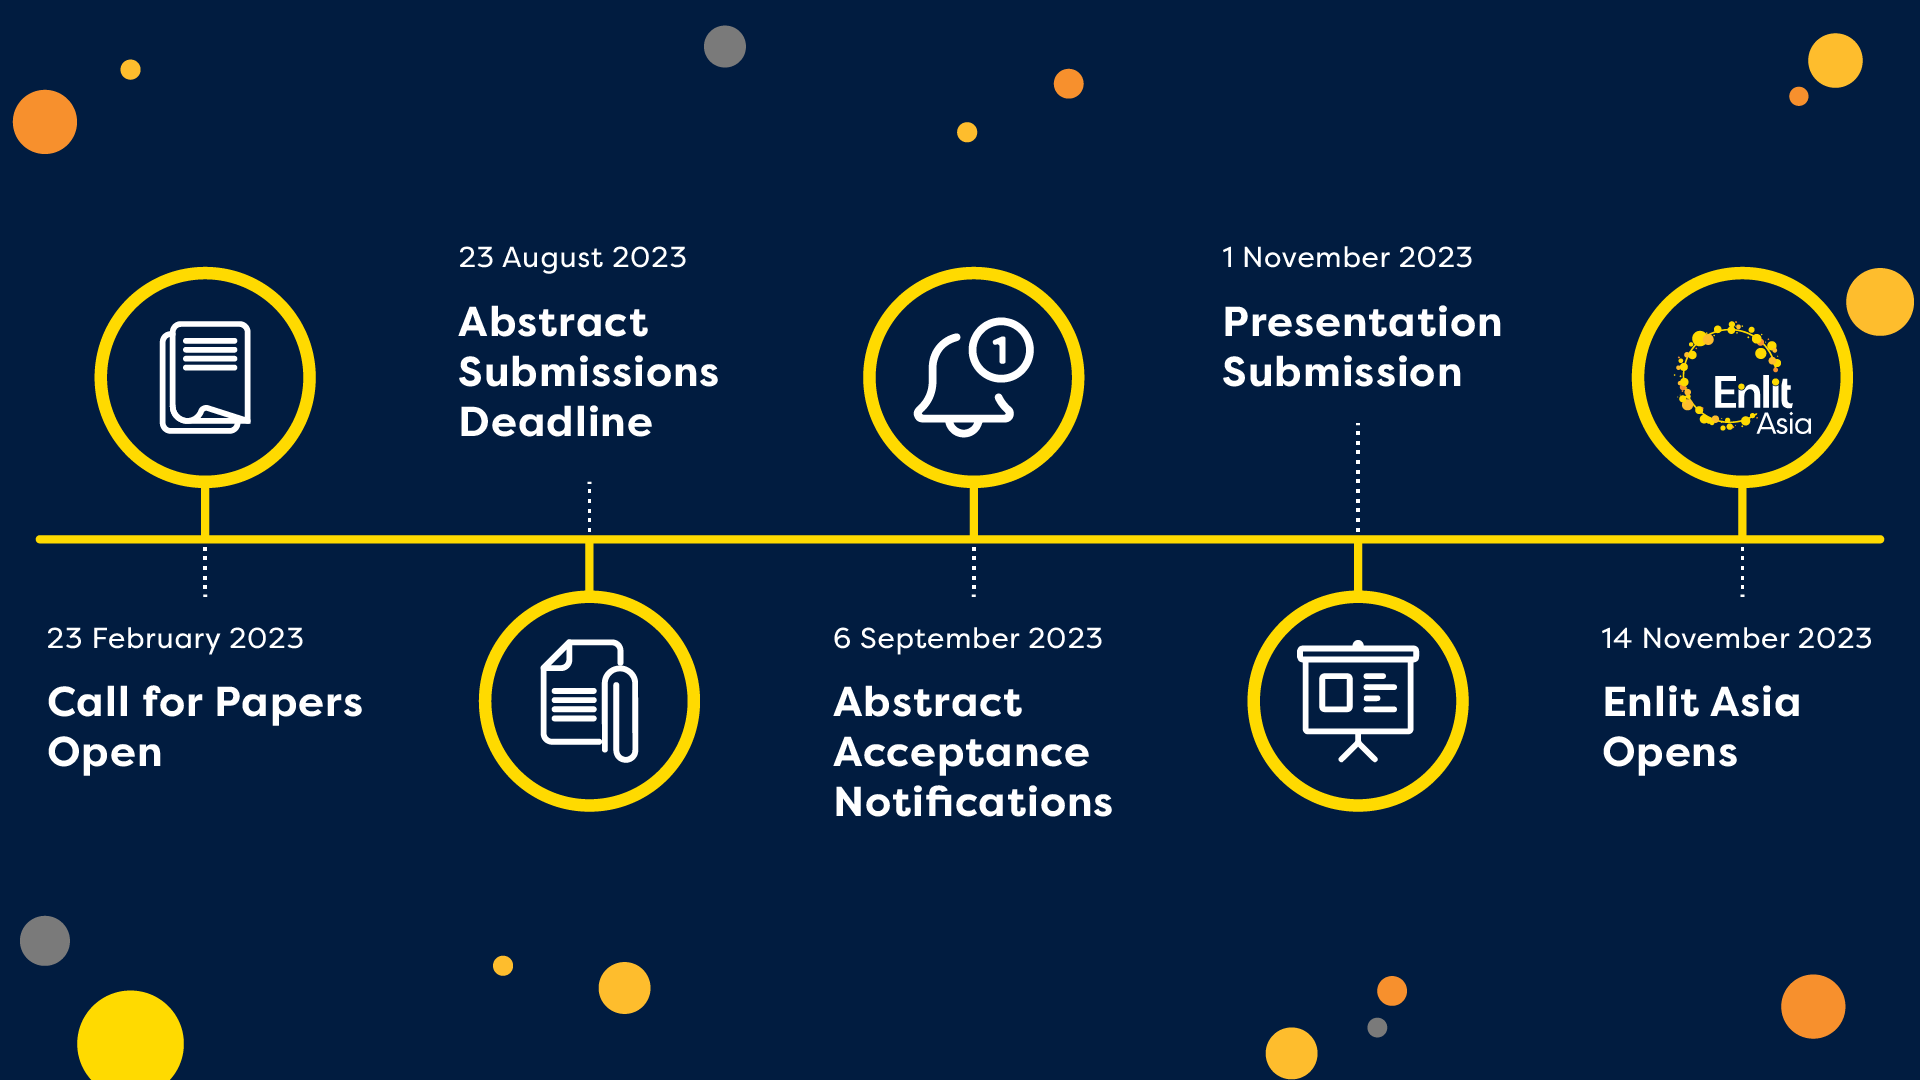 Call for Papers Timeline